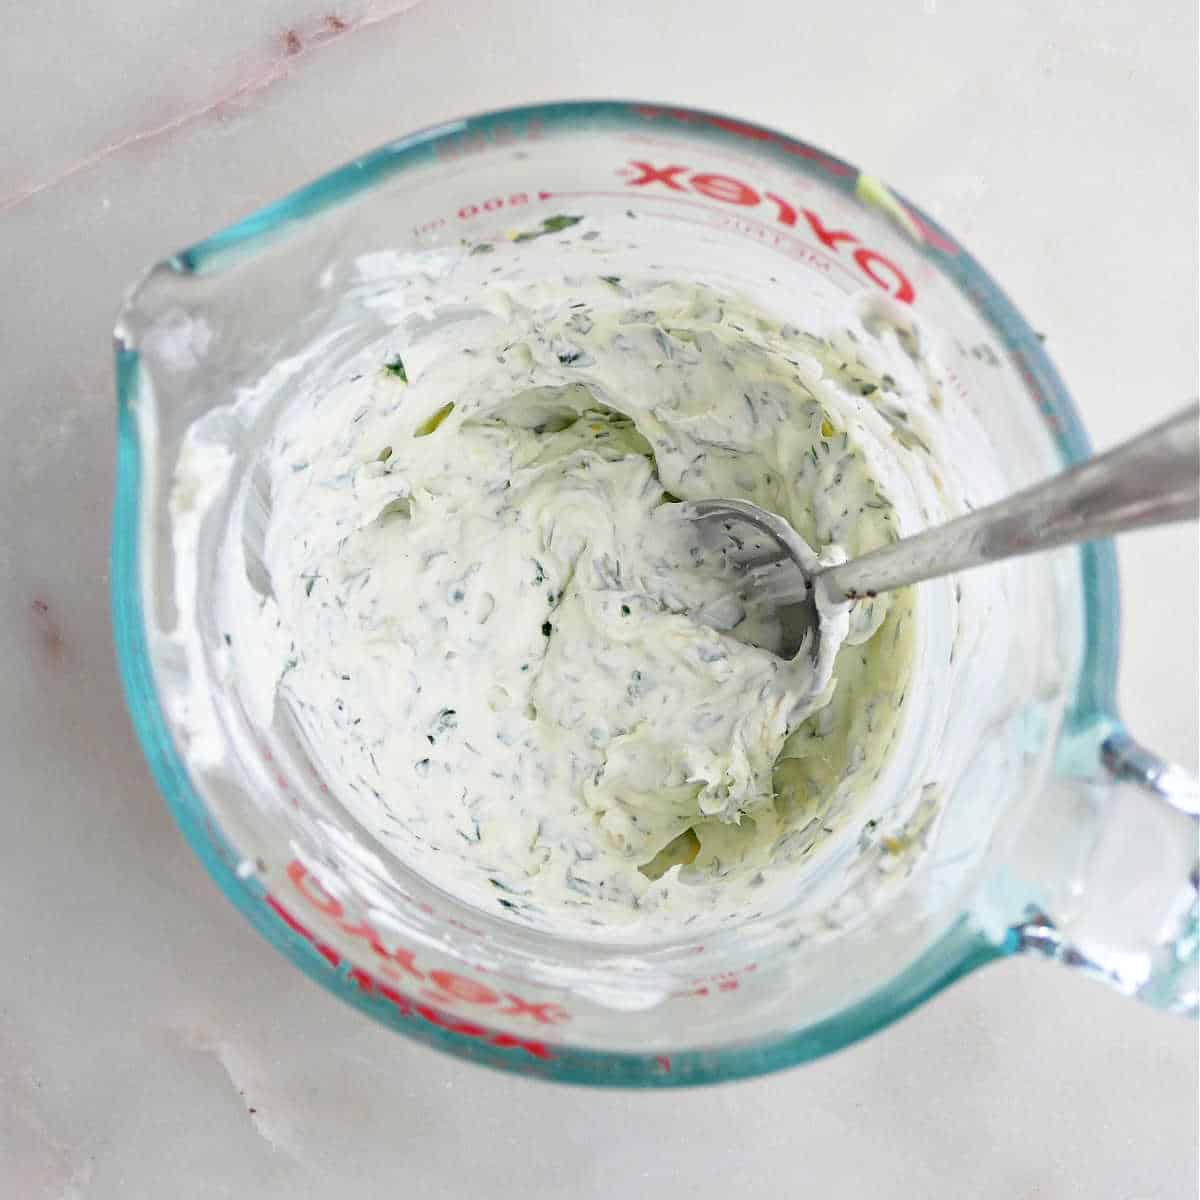 mascarpone cheese being mixed together with garlic, herbs, and lemon in a measuring cup